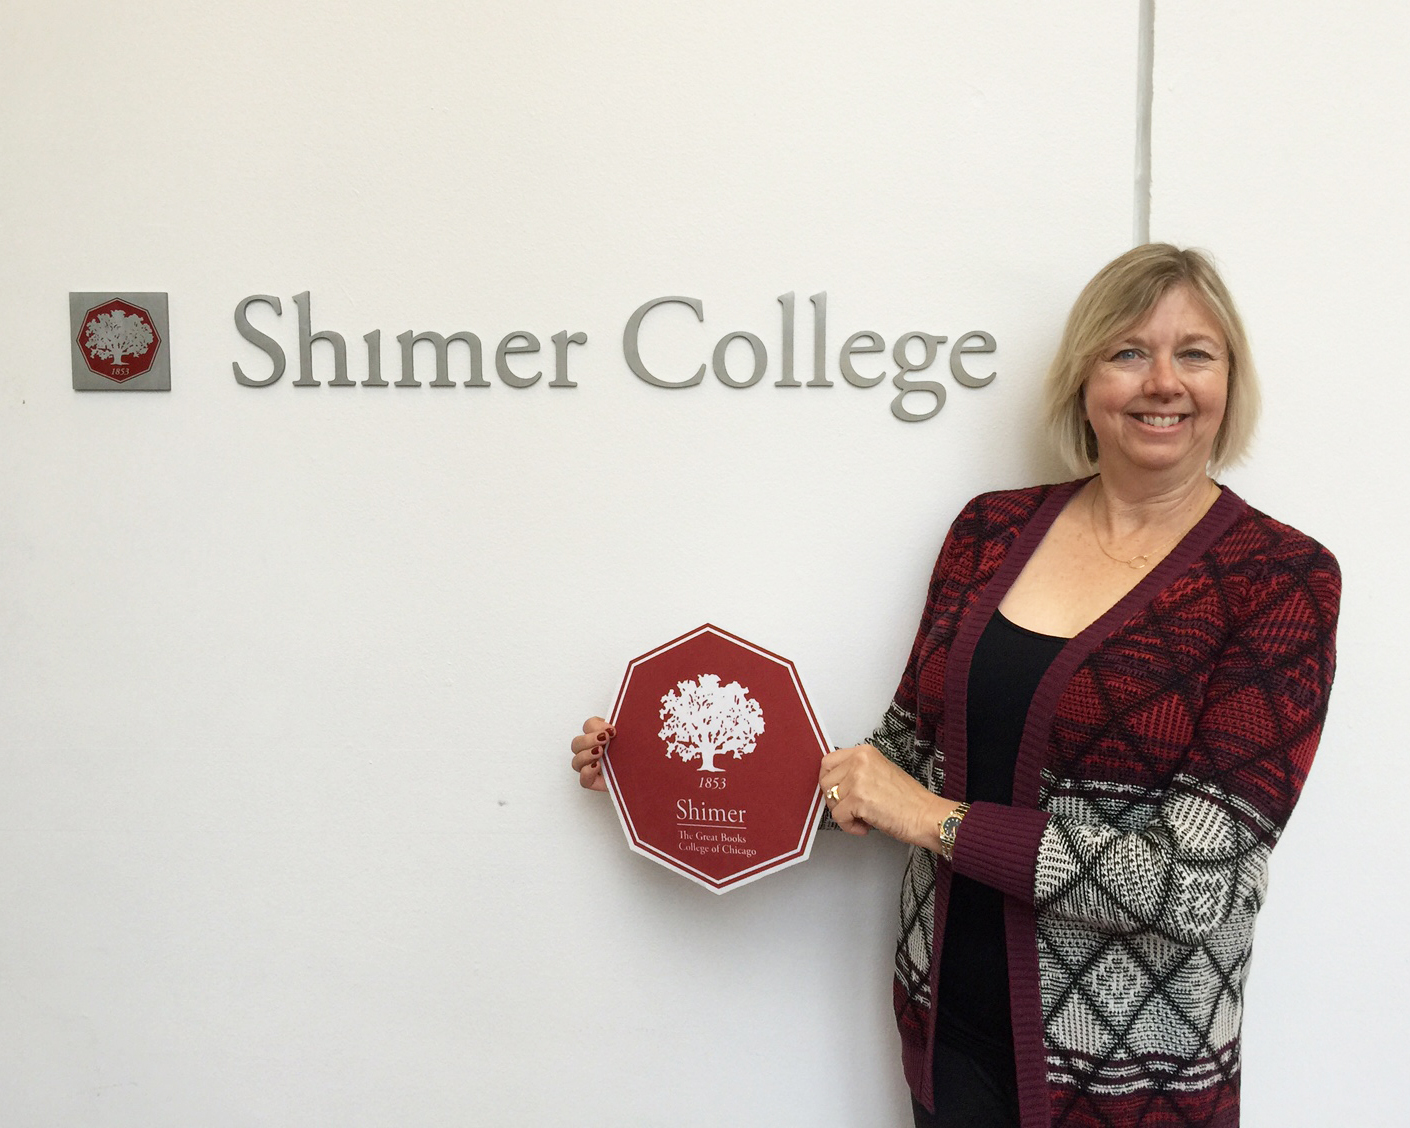 Sue at Shimer College